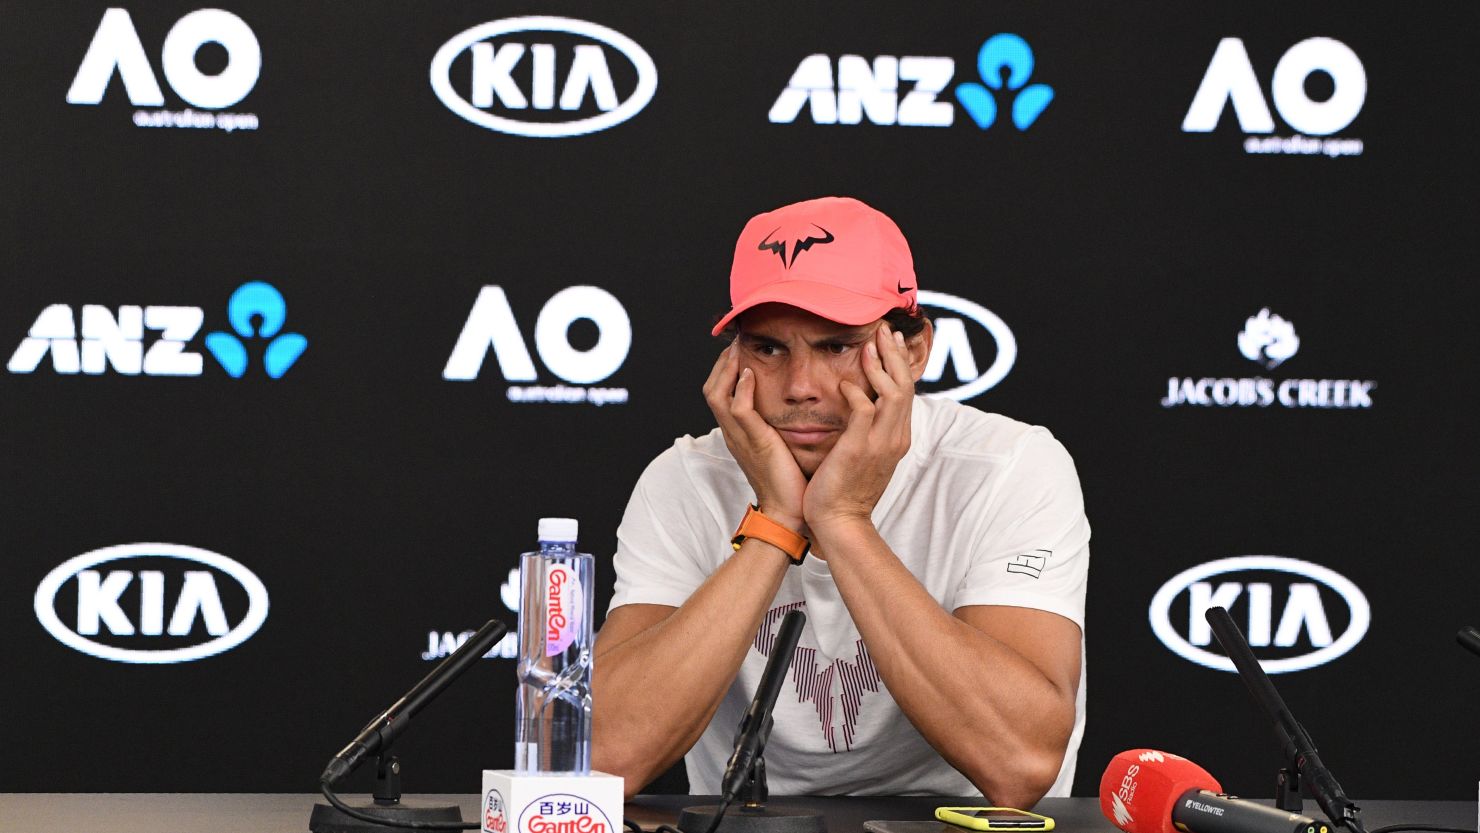 TOPSHOT - Spain's Rafael Nadal attends a press conference after retiring against Croatia's Marin Cilic in their men's singles quarter-finals match on day nine of the Australian Open tennis tournament in Melbourne on January 23, 2018. / AFP PHOTO / SAEED KHAN / -- IMAGE RESTRICTED TO EDITORIAL USE - STRICTLY NO COMMERCIAL USE --        (Photo credit should read SAEED KHAN/AFP/Getty Images)